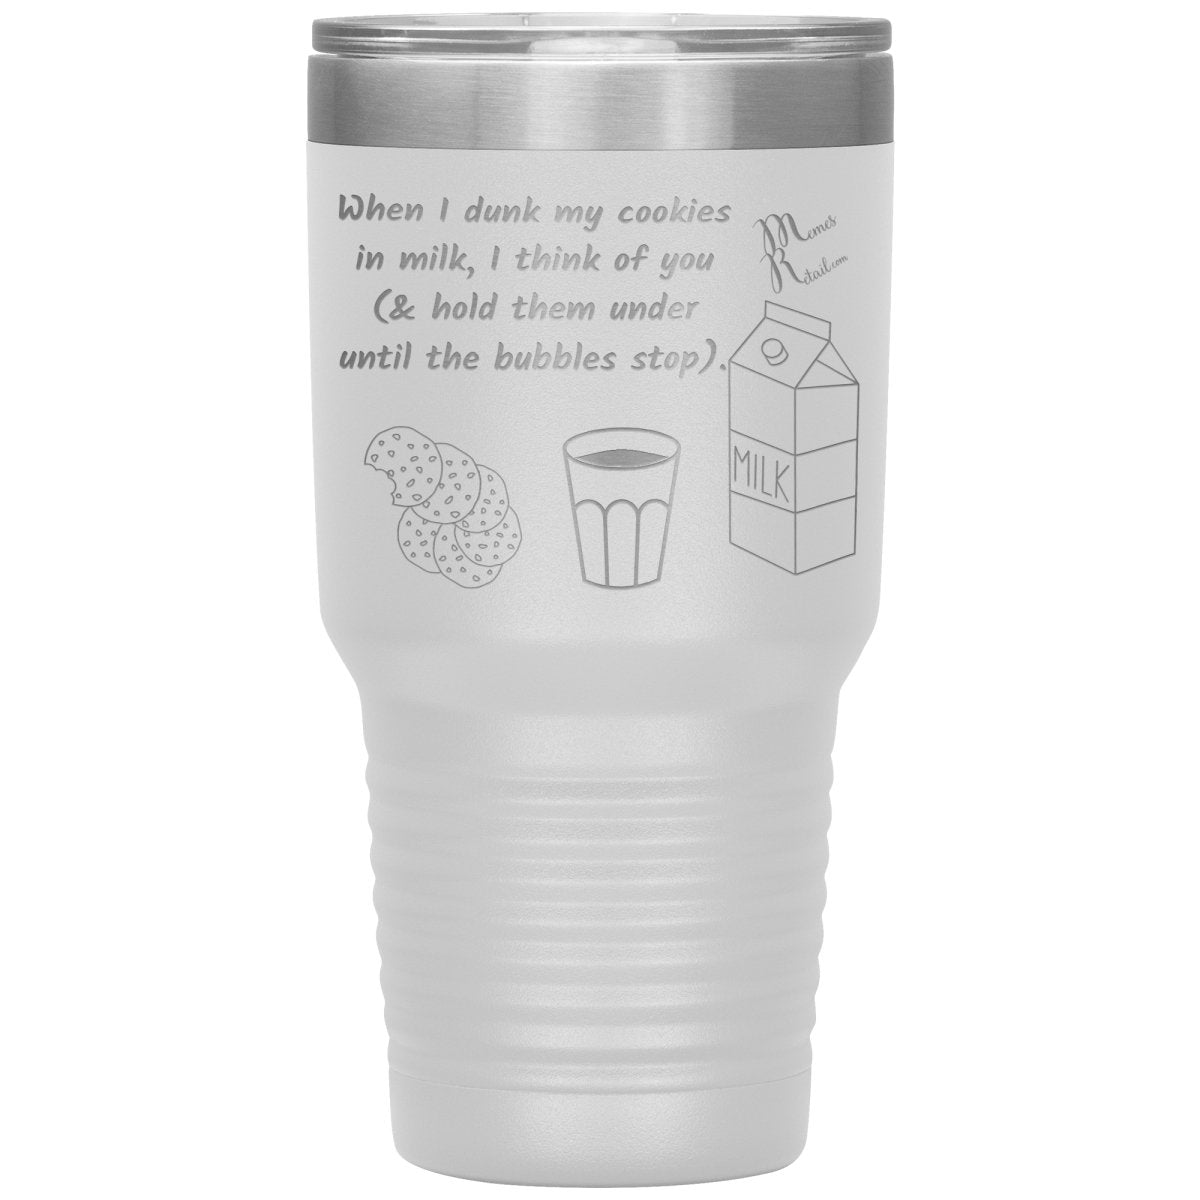 When I dunk My Cookies in Milk, I think of You - Tumblers, 30oz Insulated Tumbler / White - MemesRetail.com